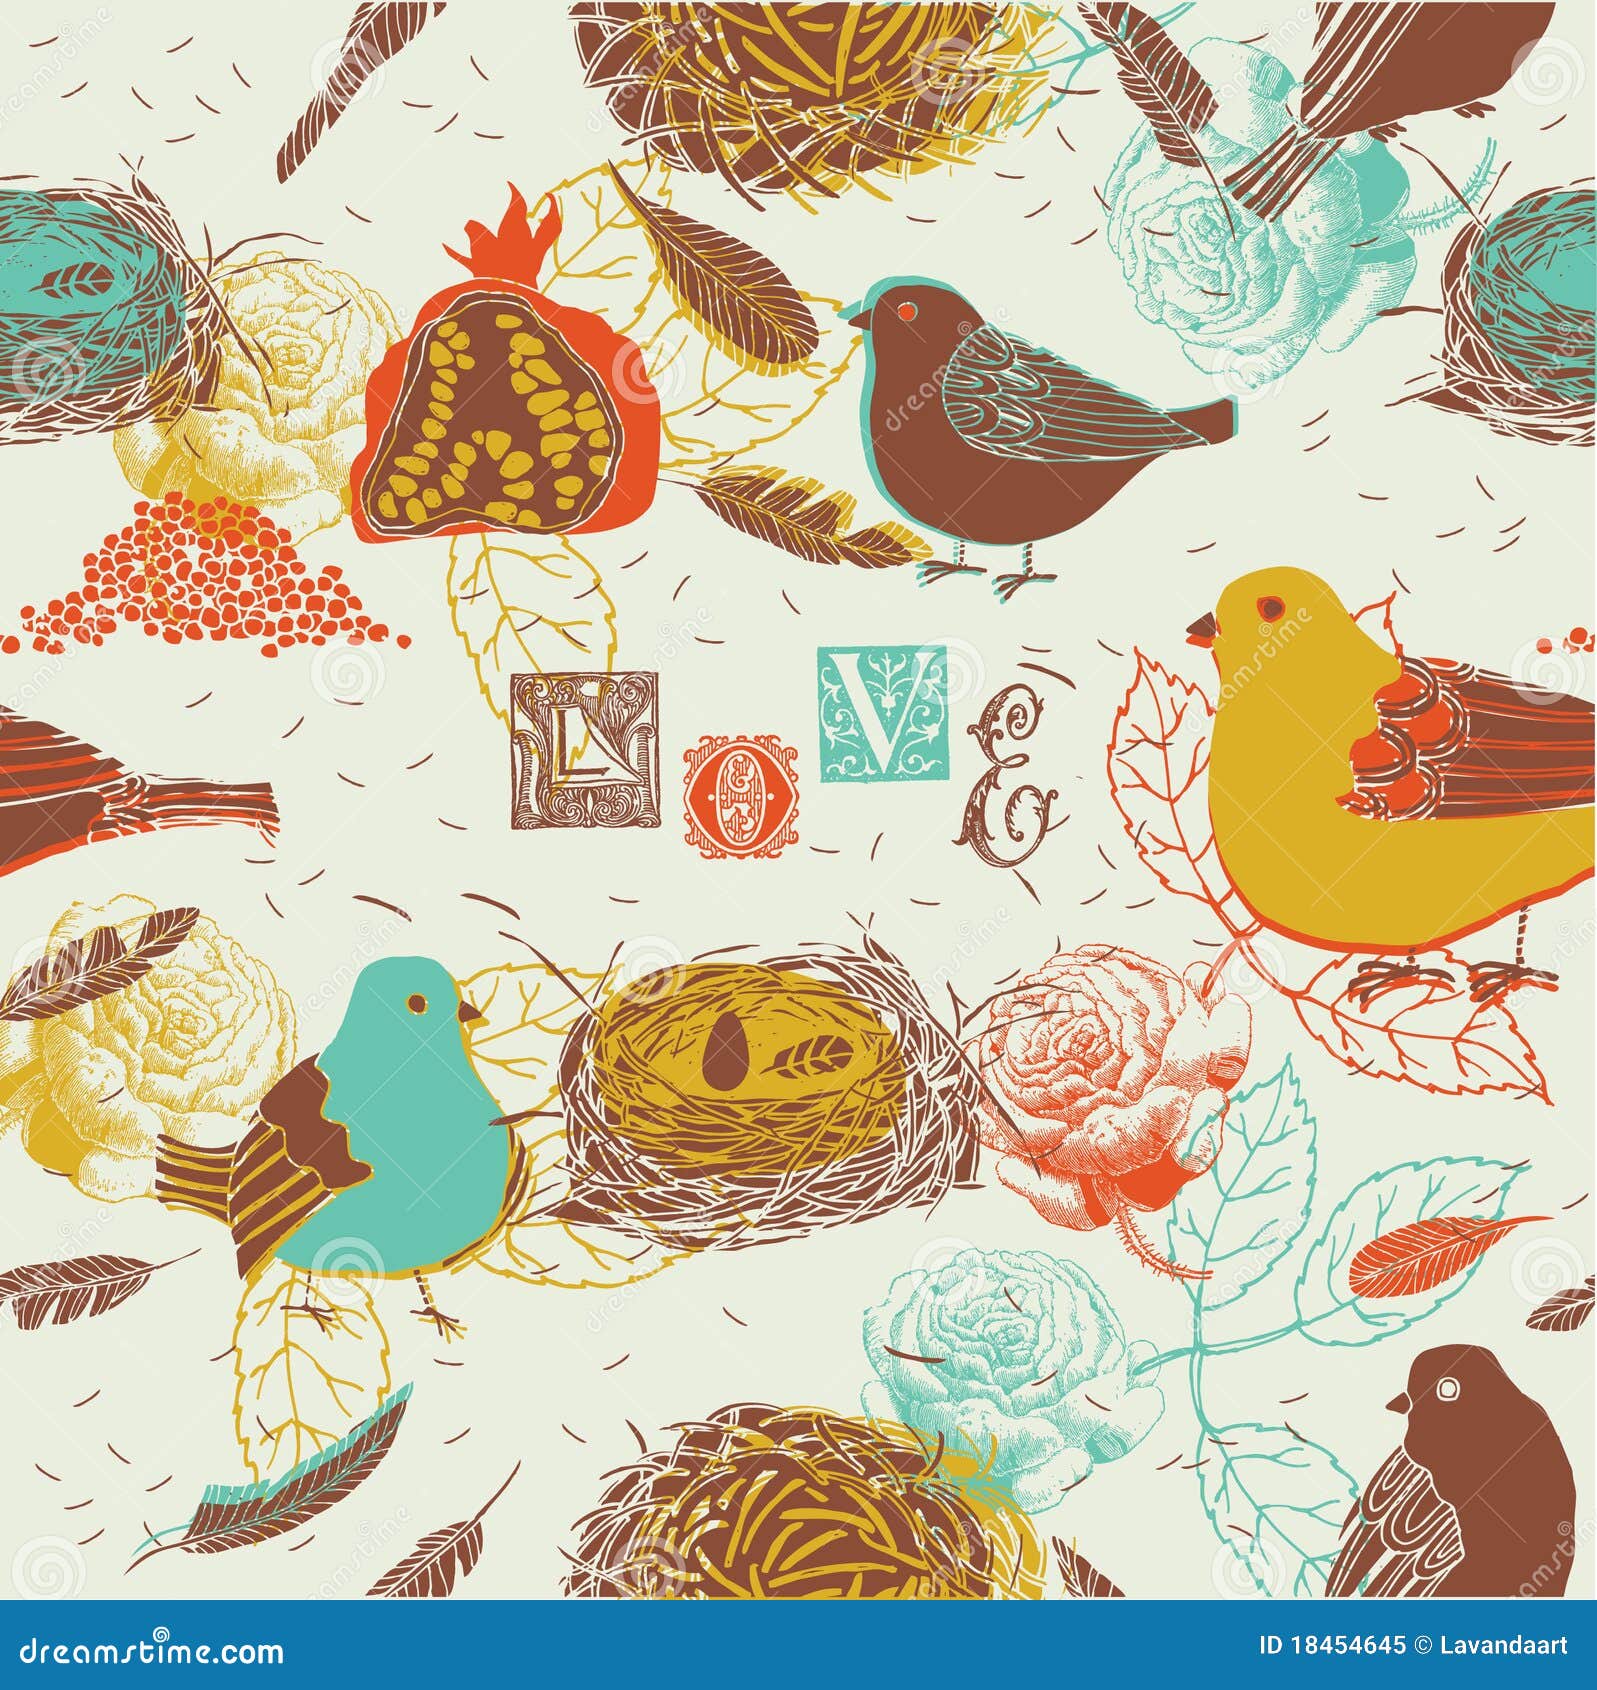 birds and nests background